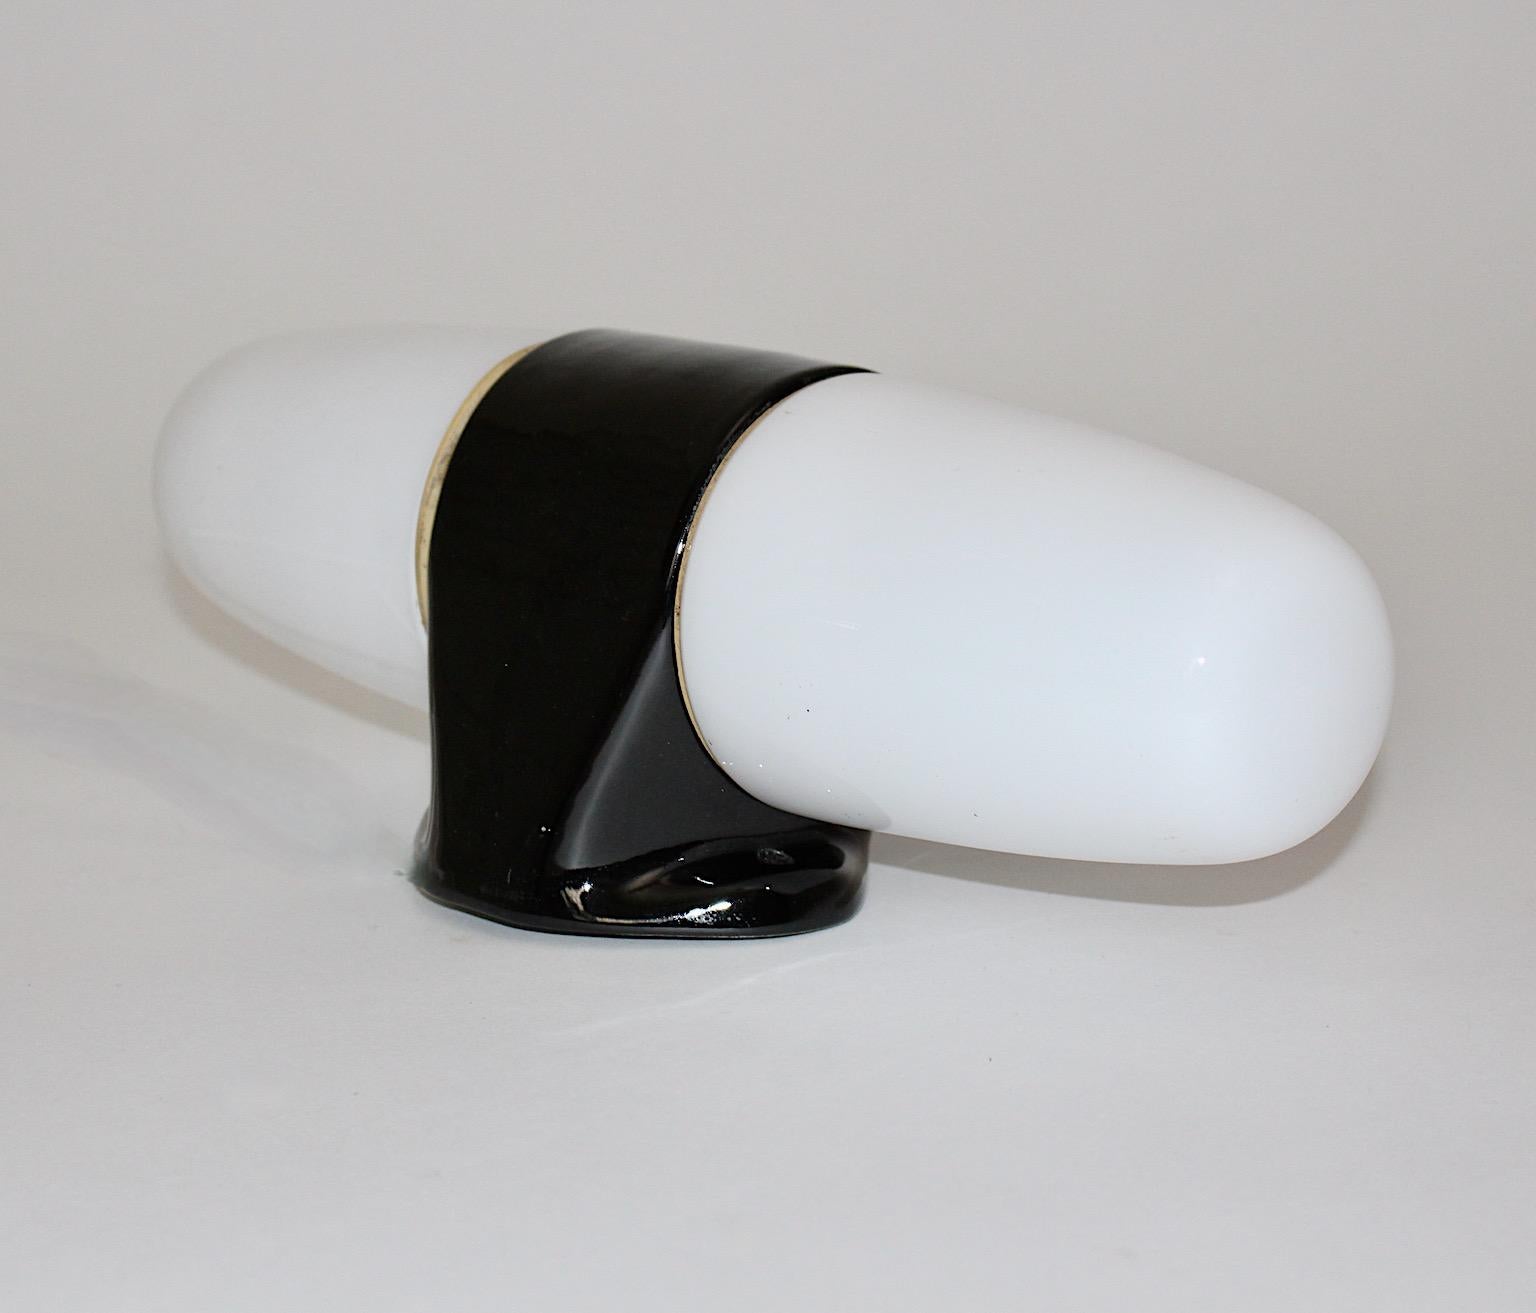 Wilhelm Wagenfeld Mid-Century Modern vintage black and white ceramic glass sconce or wall light, which was designed by Wilhelm Wagenfeld and produced by Linder, Germany circa 1950.
The sconce shows a rare huge size, while the base from black